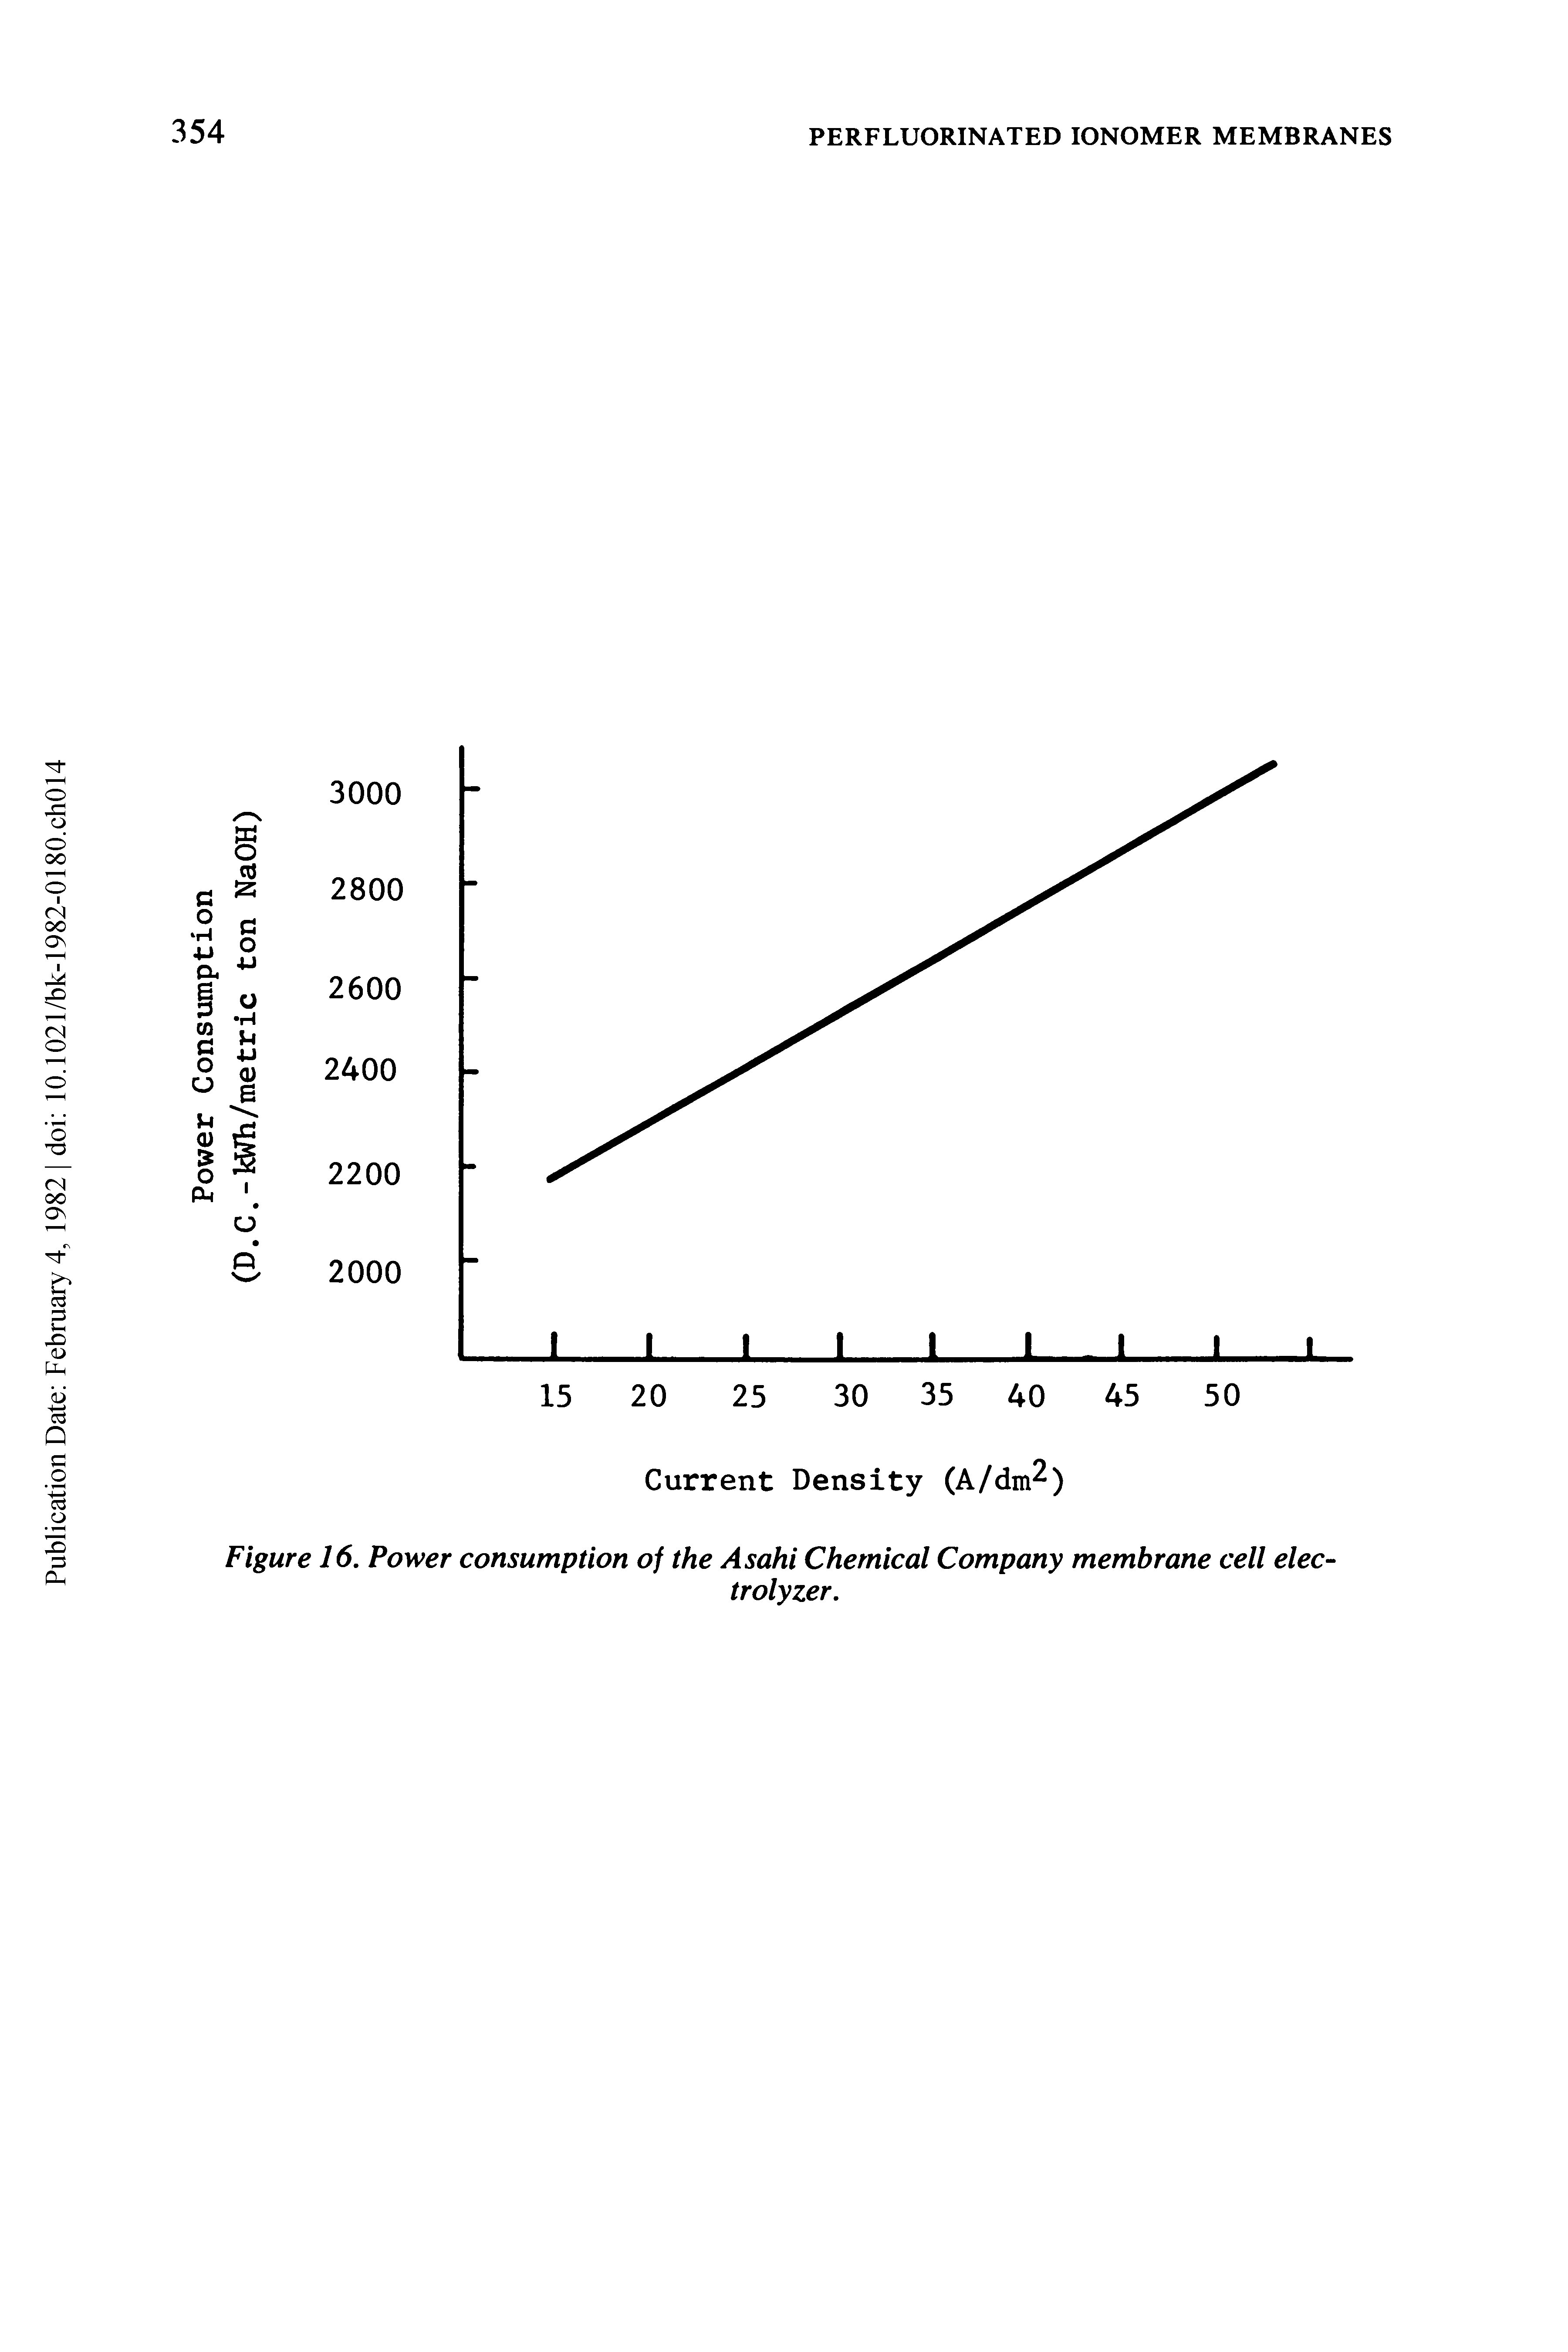 Figure 16. Power consumption of the Asahi Chemical Company membrane cell electrolyzer.